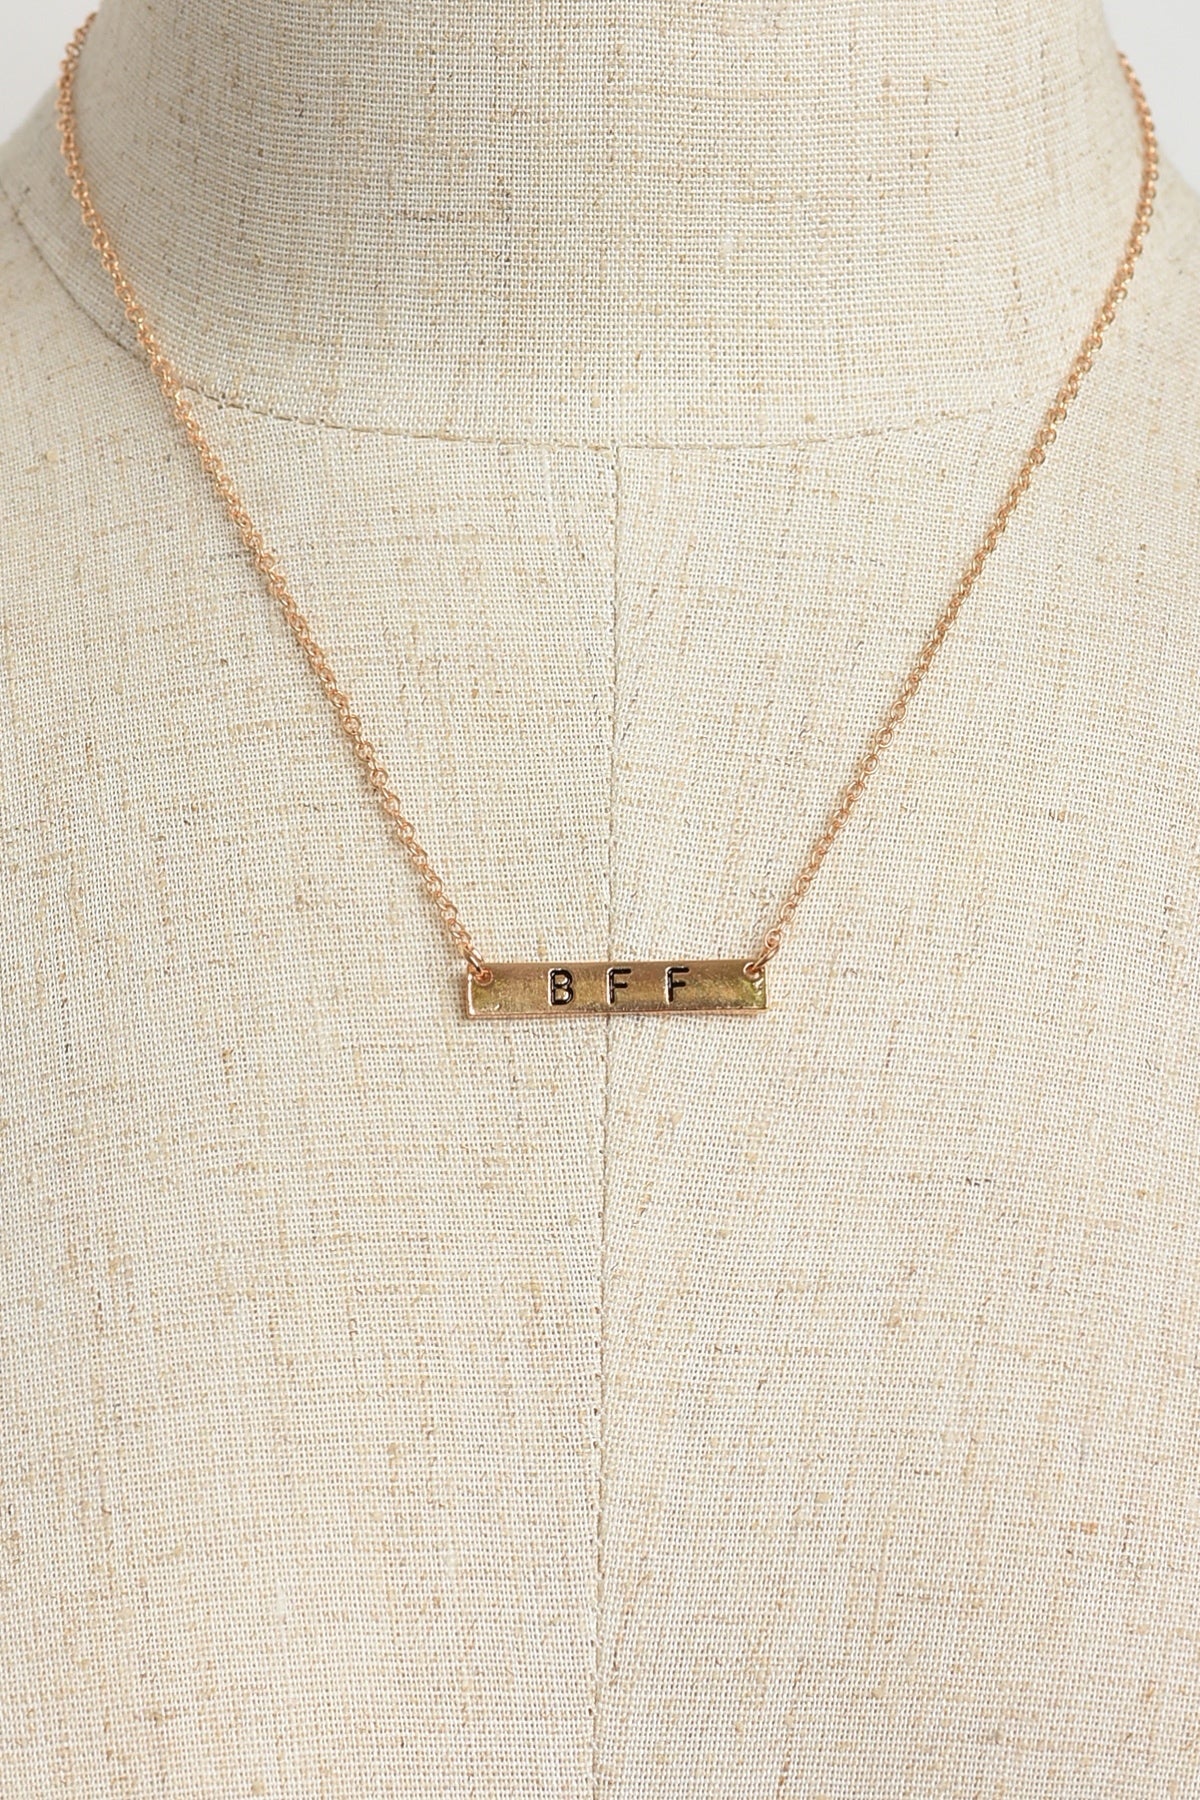 Gold "Bff" Chain Necklaces